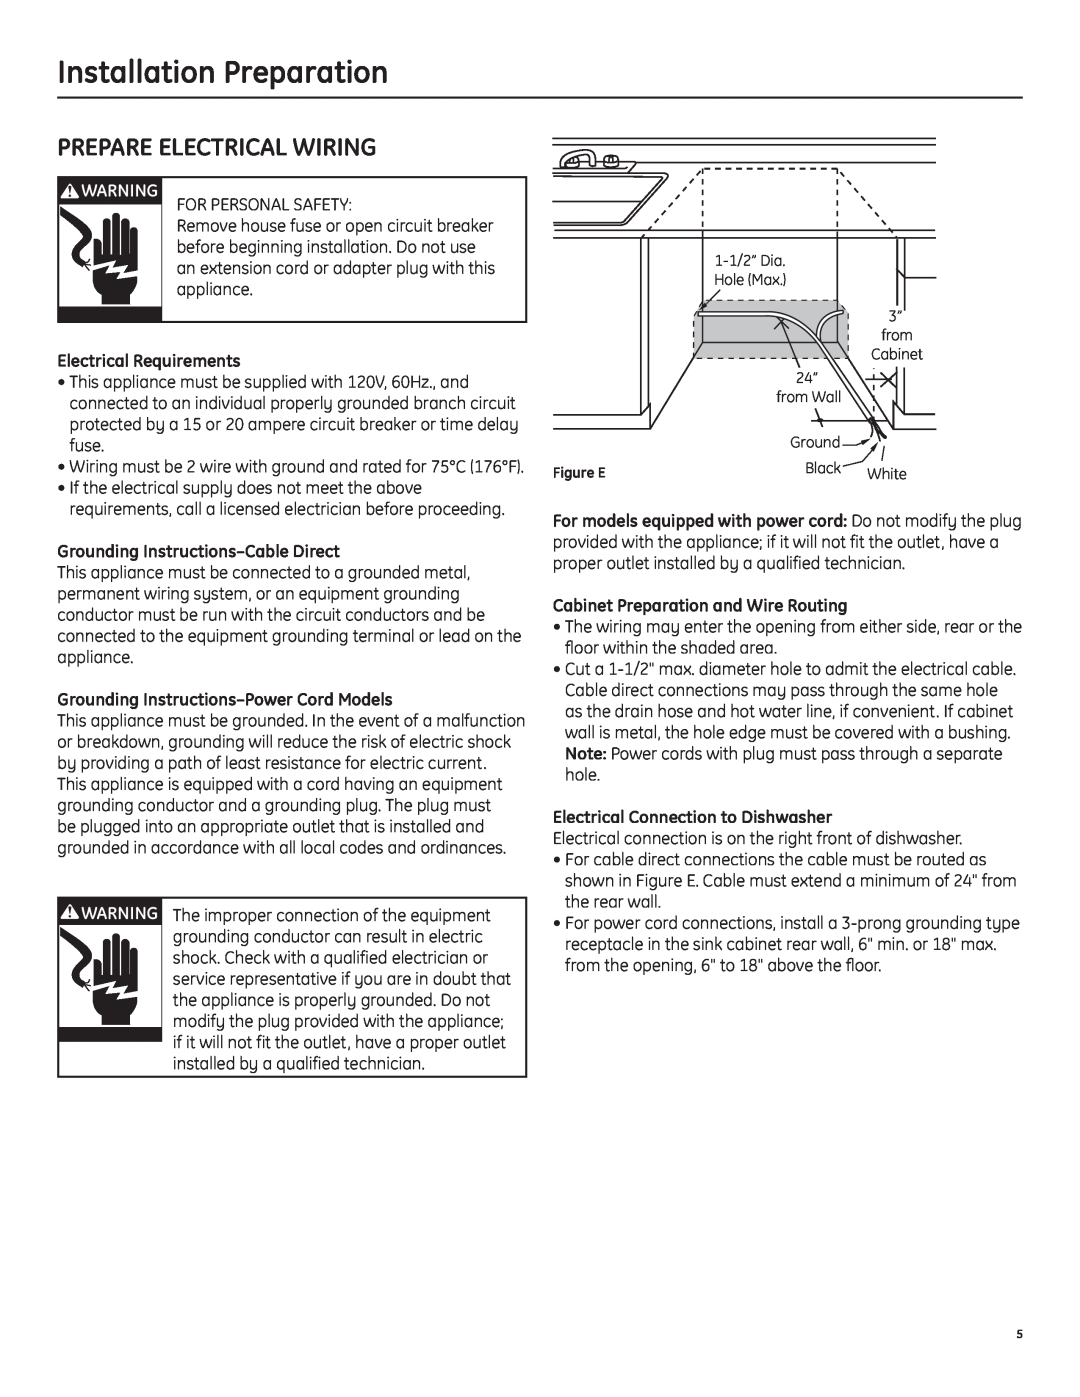 GE ZBD1870NSS installation instructions Prepare Electrical Wiring, Installation Preparation, Electrical Requirements 